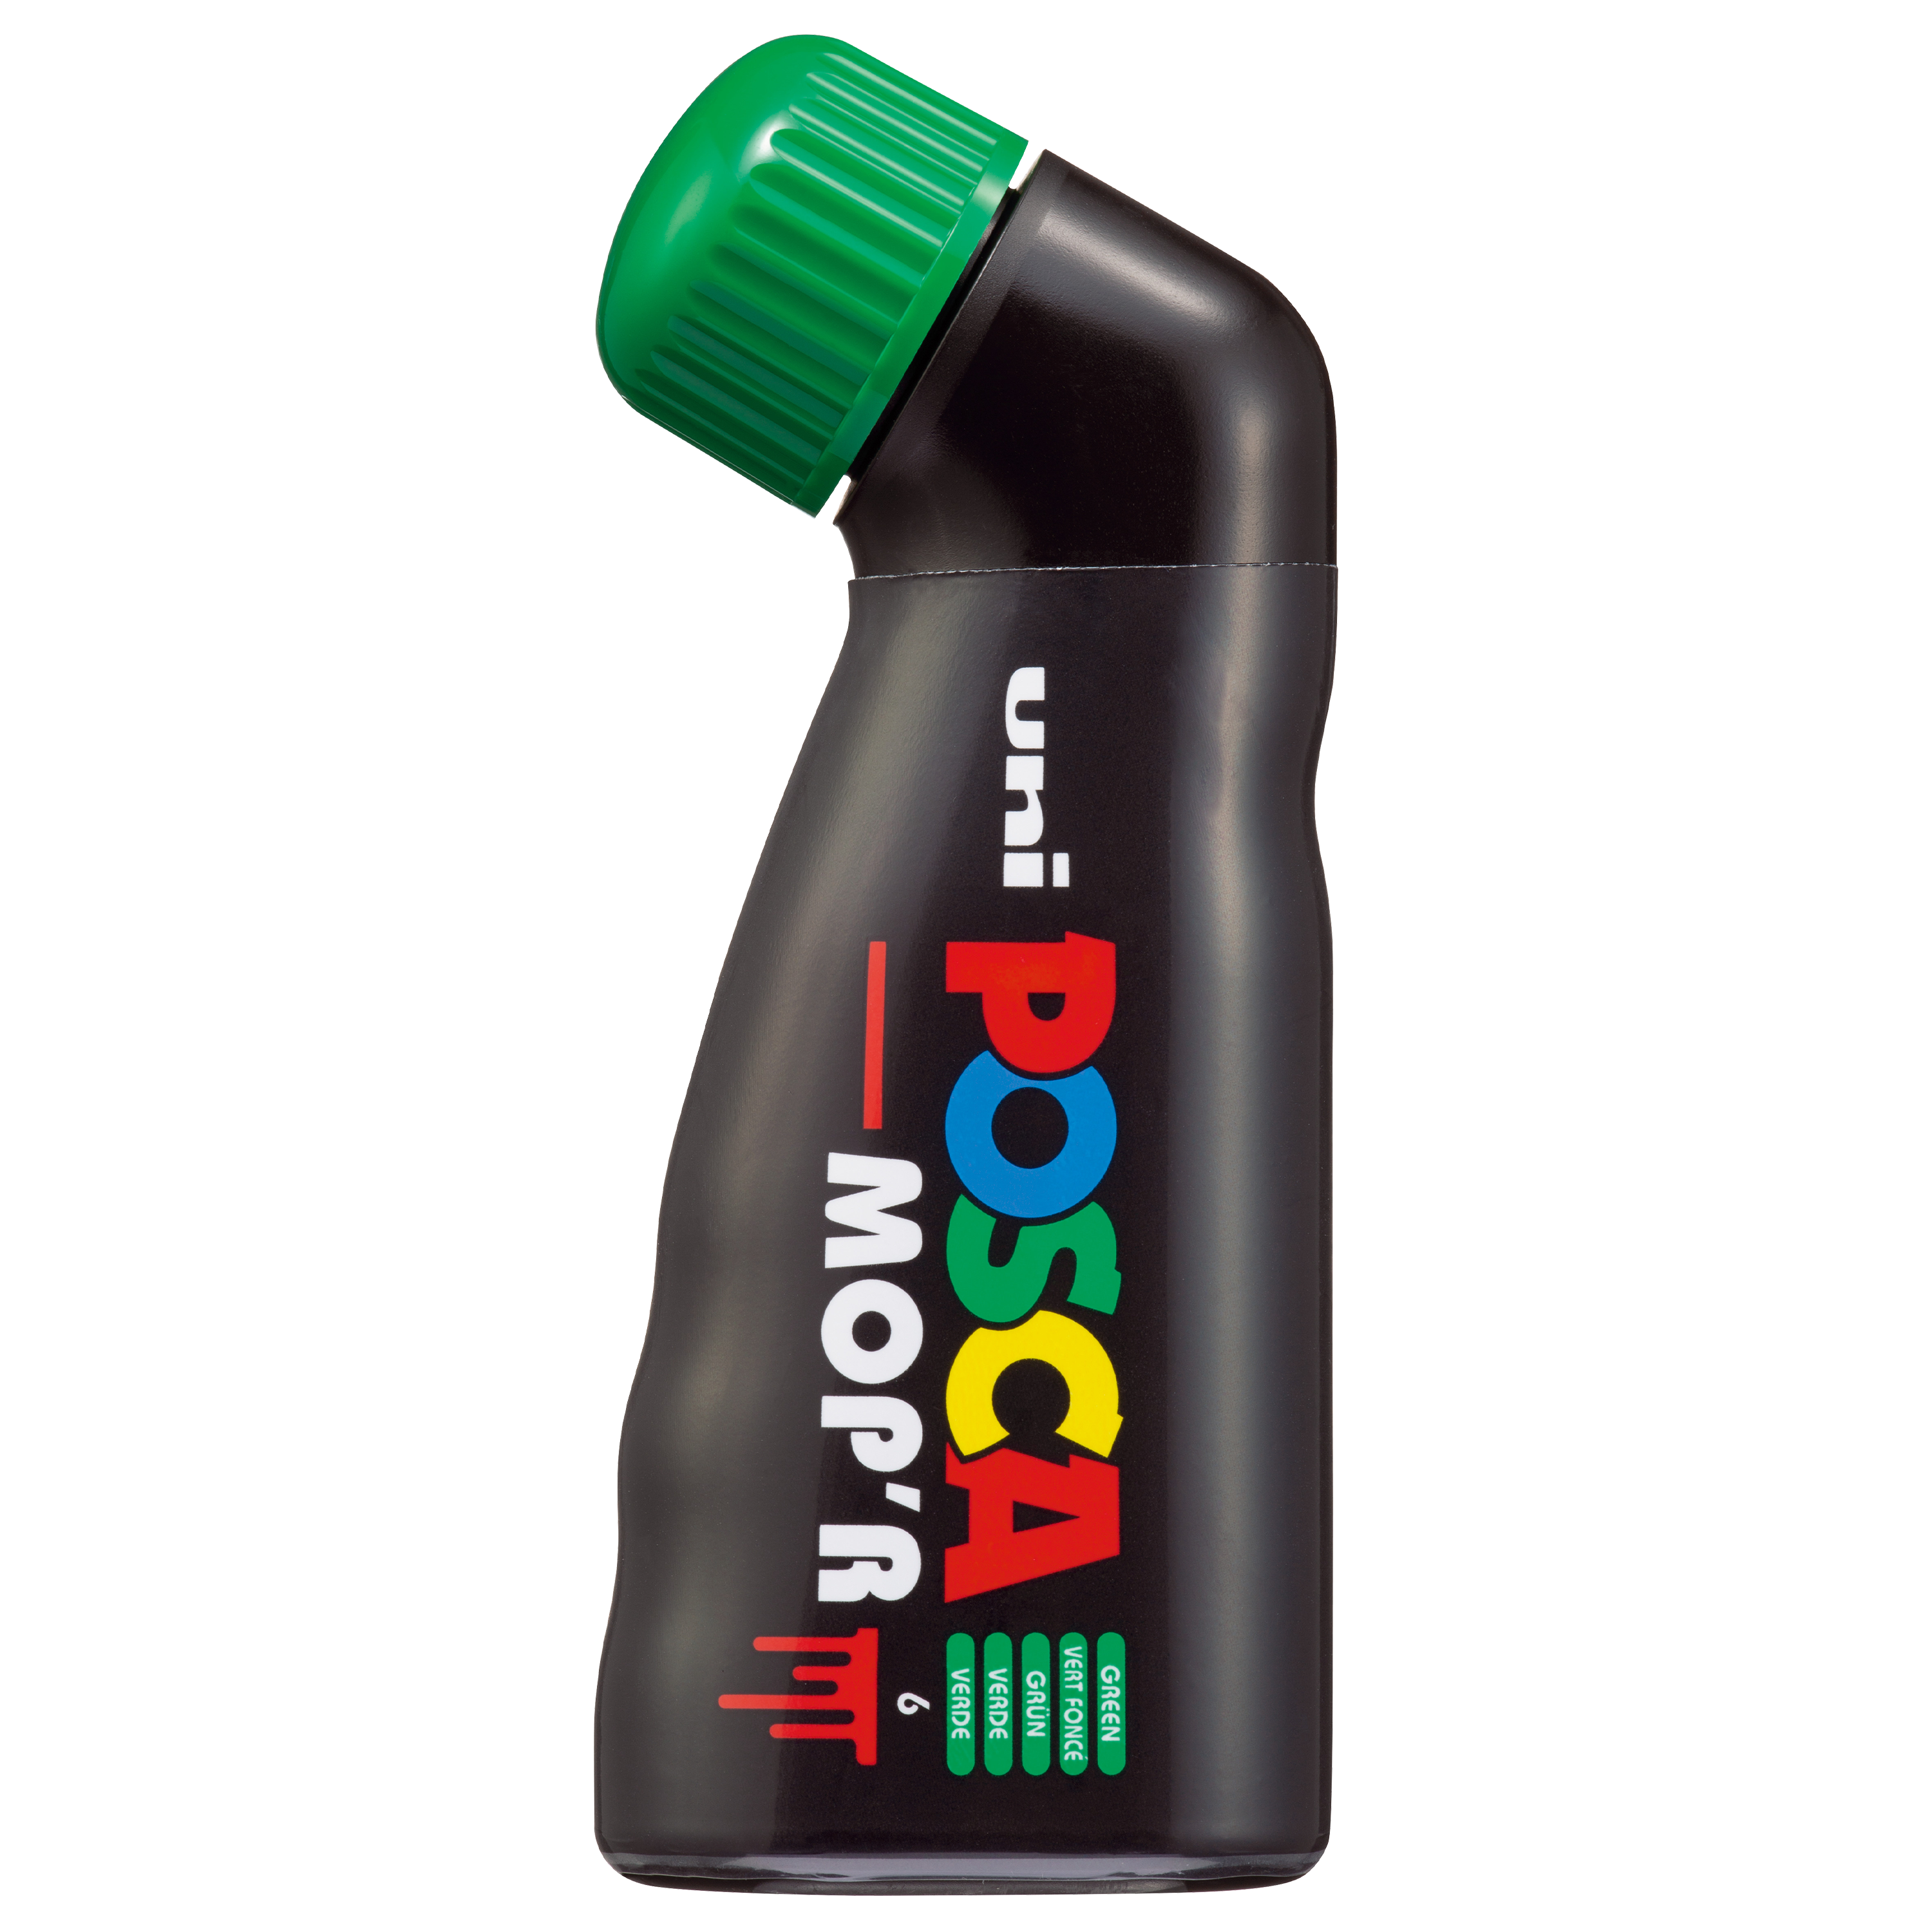 uni® POSCA MOP'R PCM-22, Water-Based Paint Markers